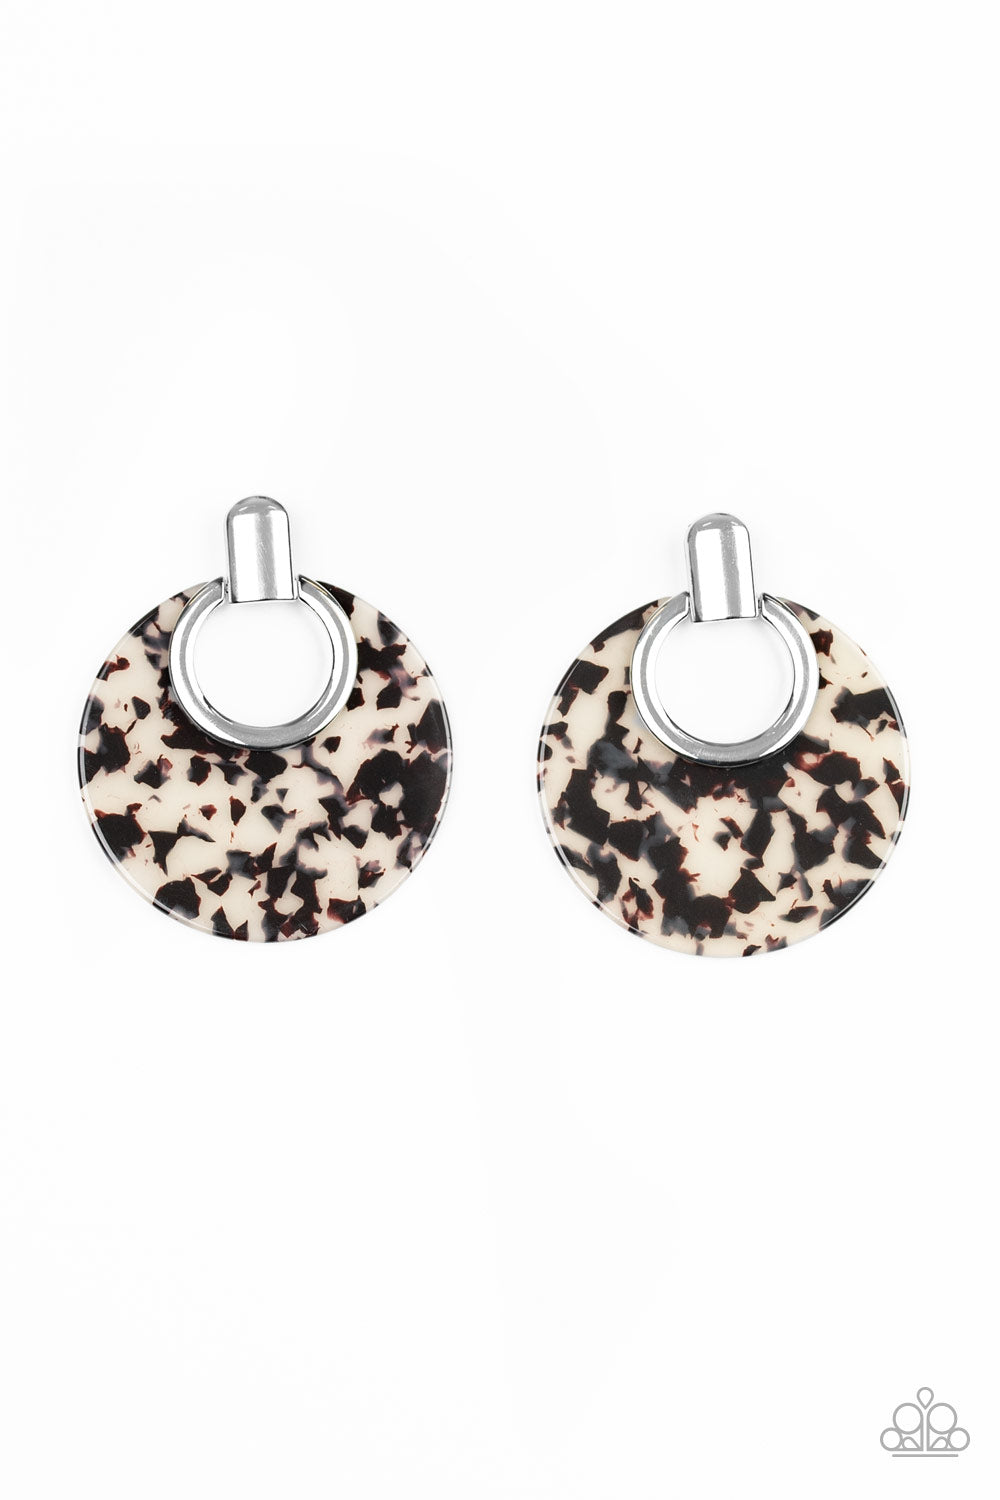 Paparazzi Accessories Metro Zoo - White Earrings - Lady T Accessories